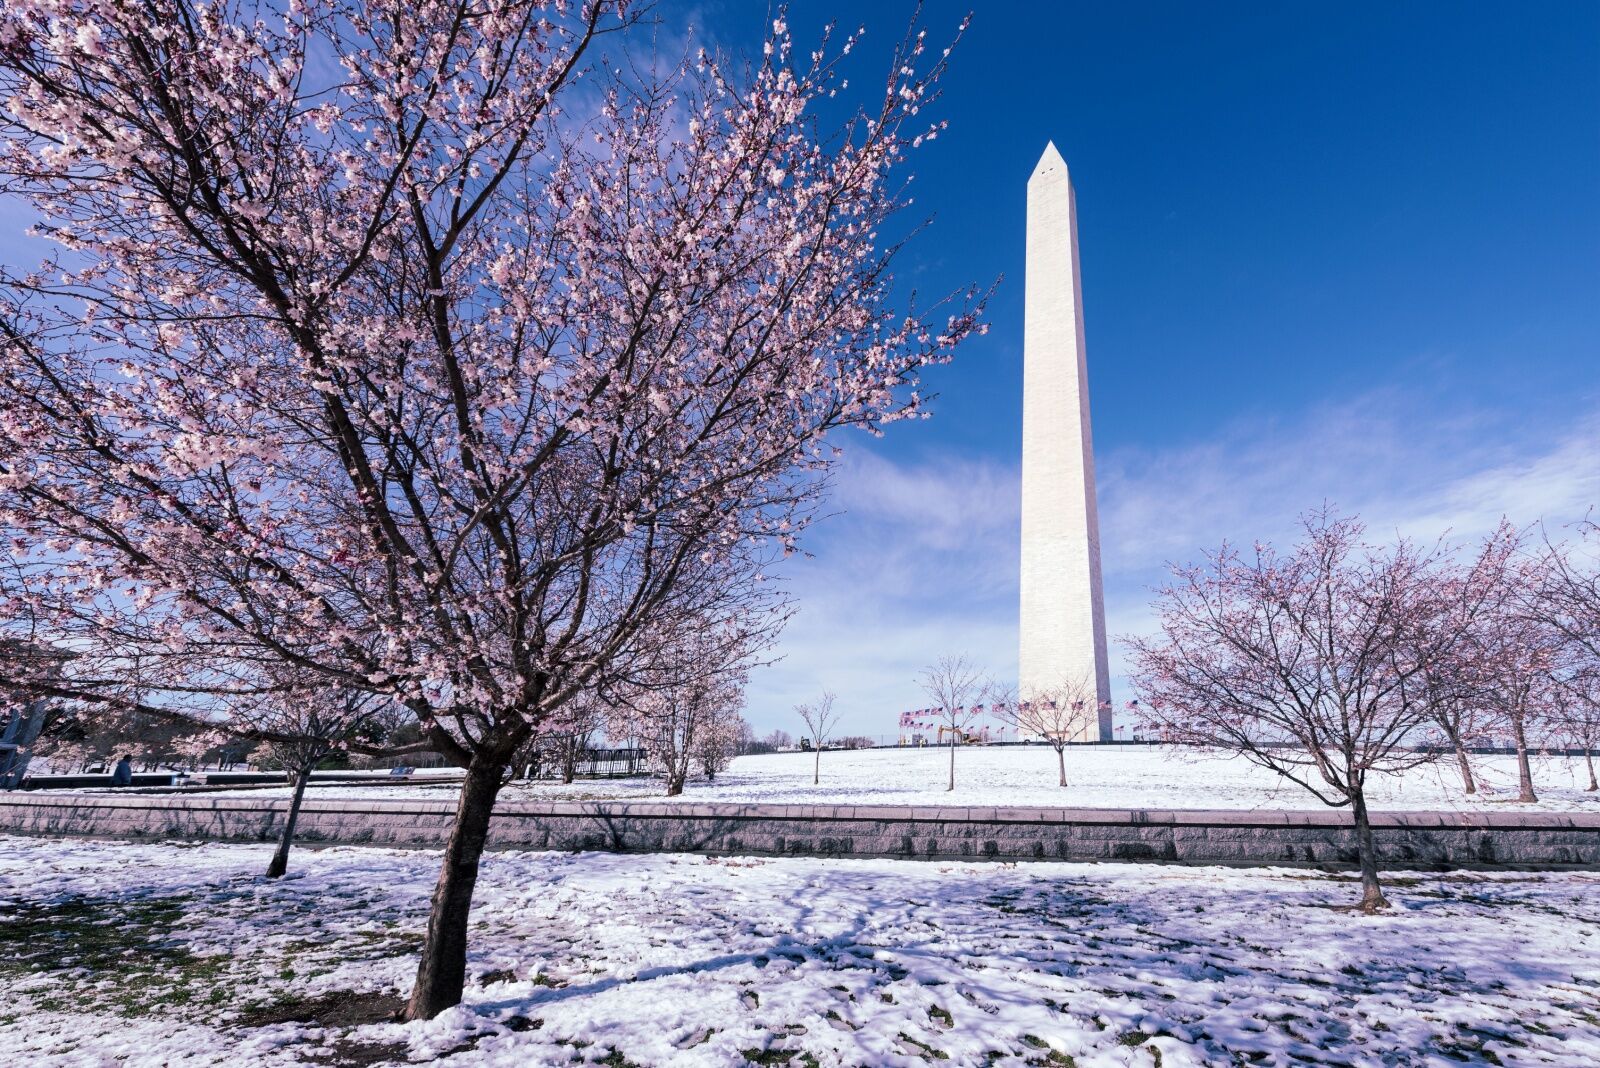 dc cherry blossoms covered in snow